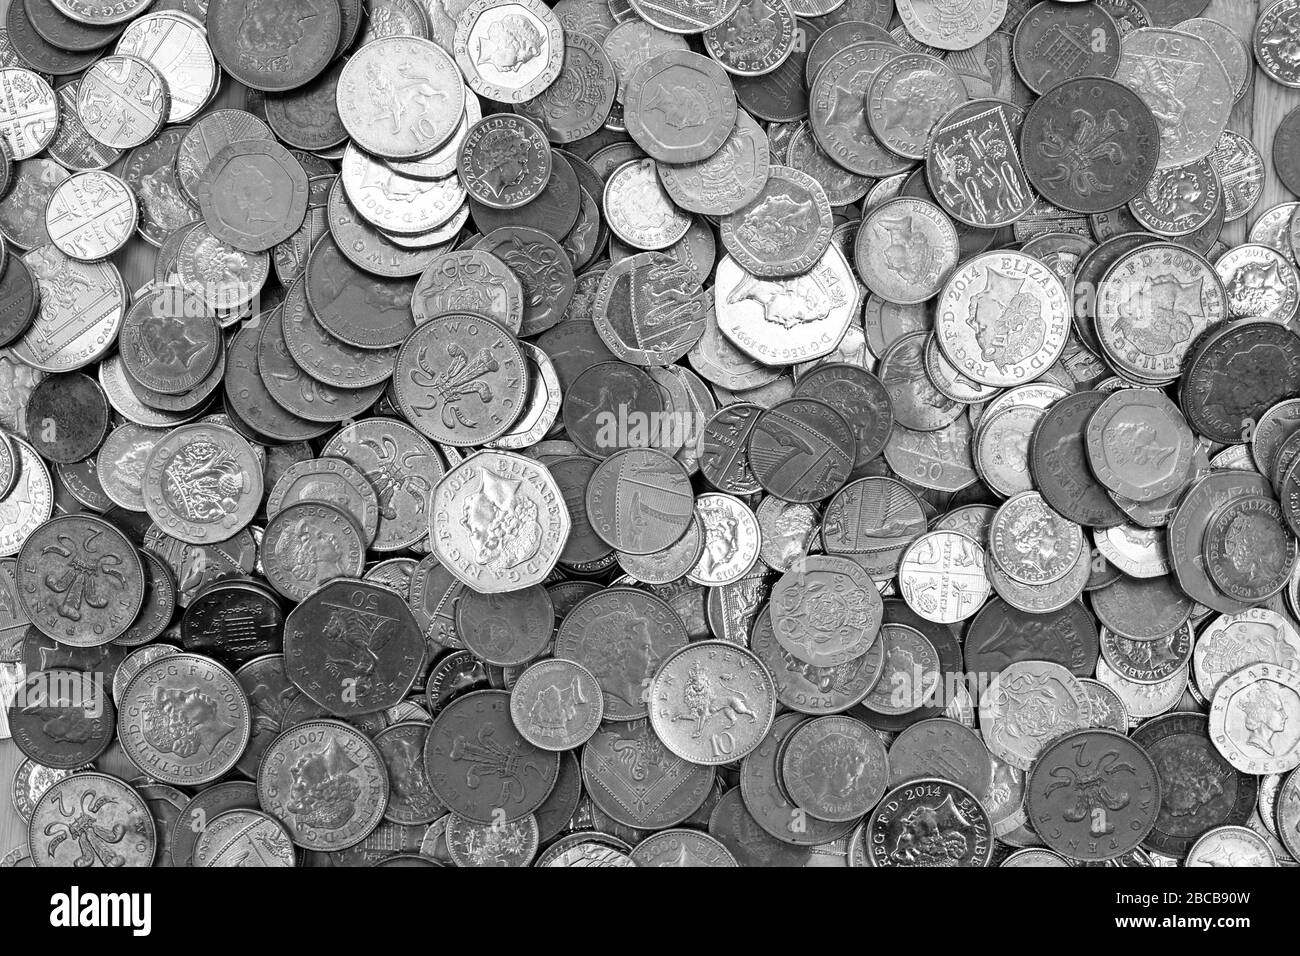 UK currency, hundreds of British copper and silver colored coins randomly piled ontop of each other, one pound coins, fifty pence, twenty pence, two p Stock Photo